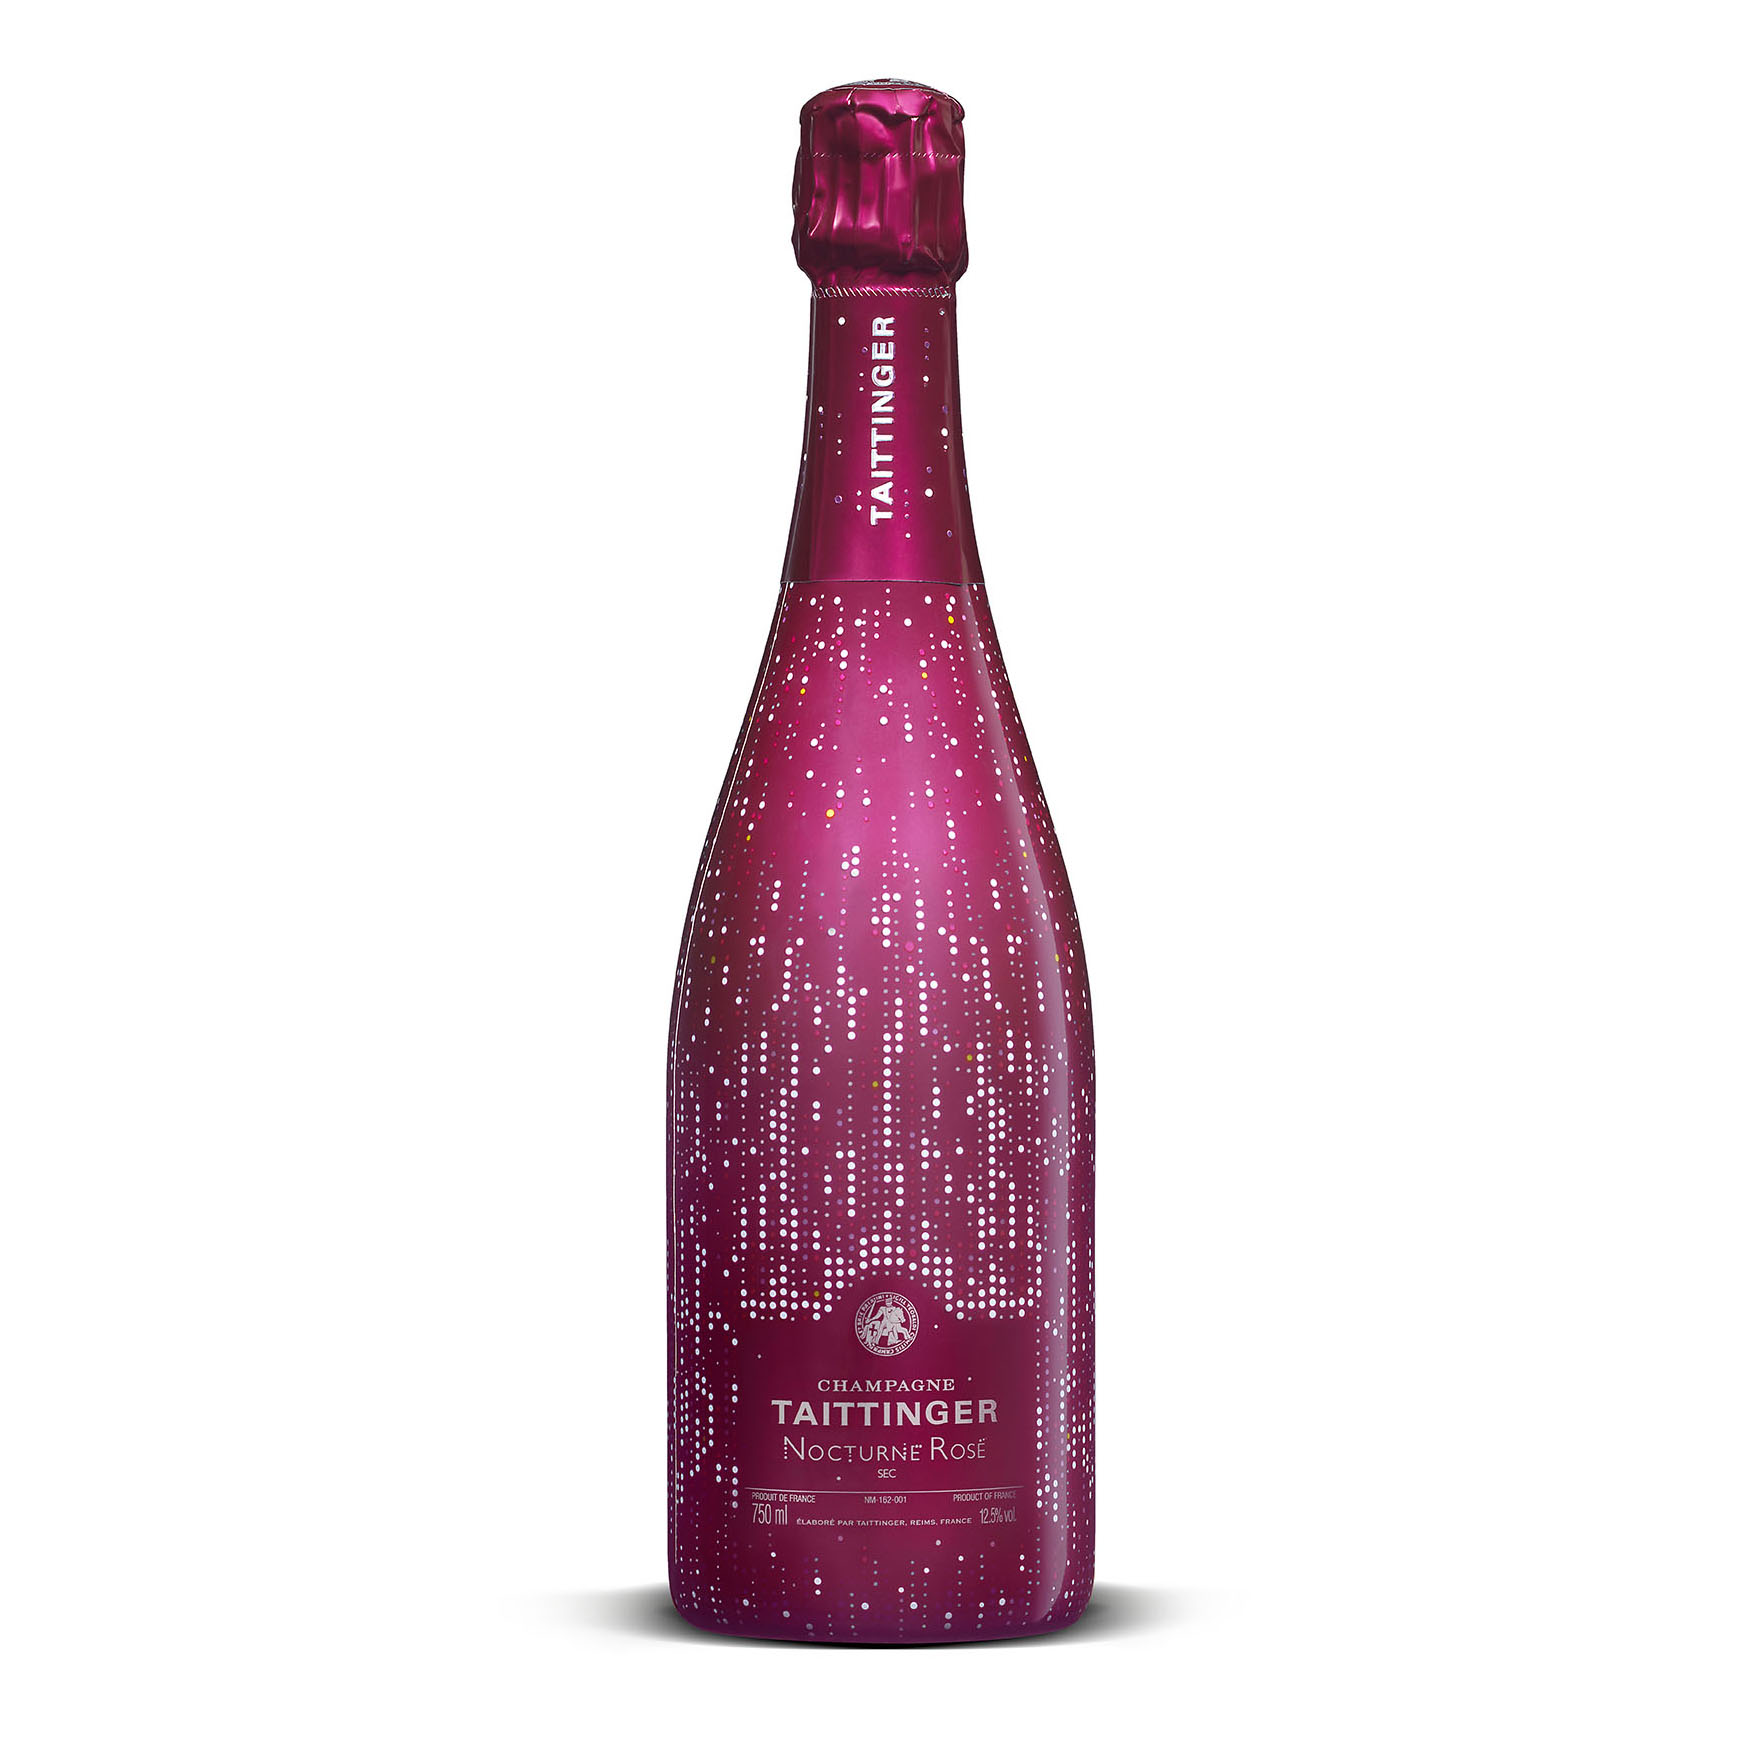 Buy Taittinger Nocturne Rose City Lights Edition Champagne 75cl